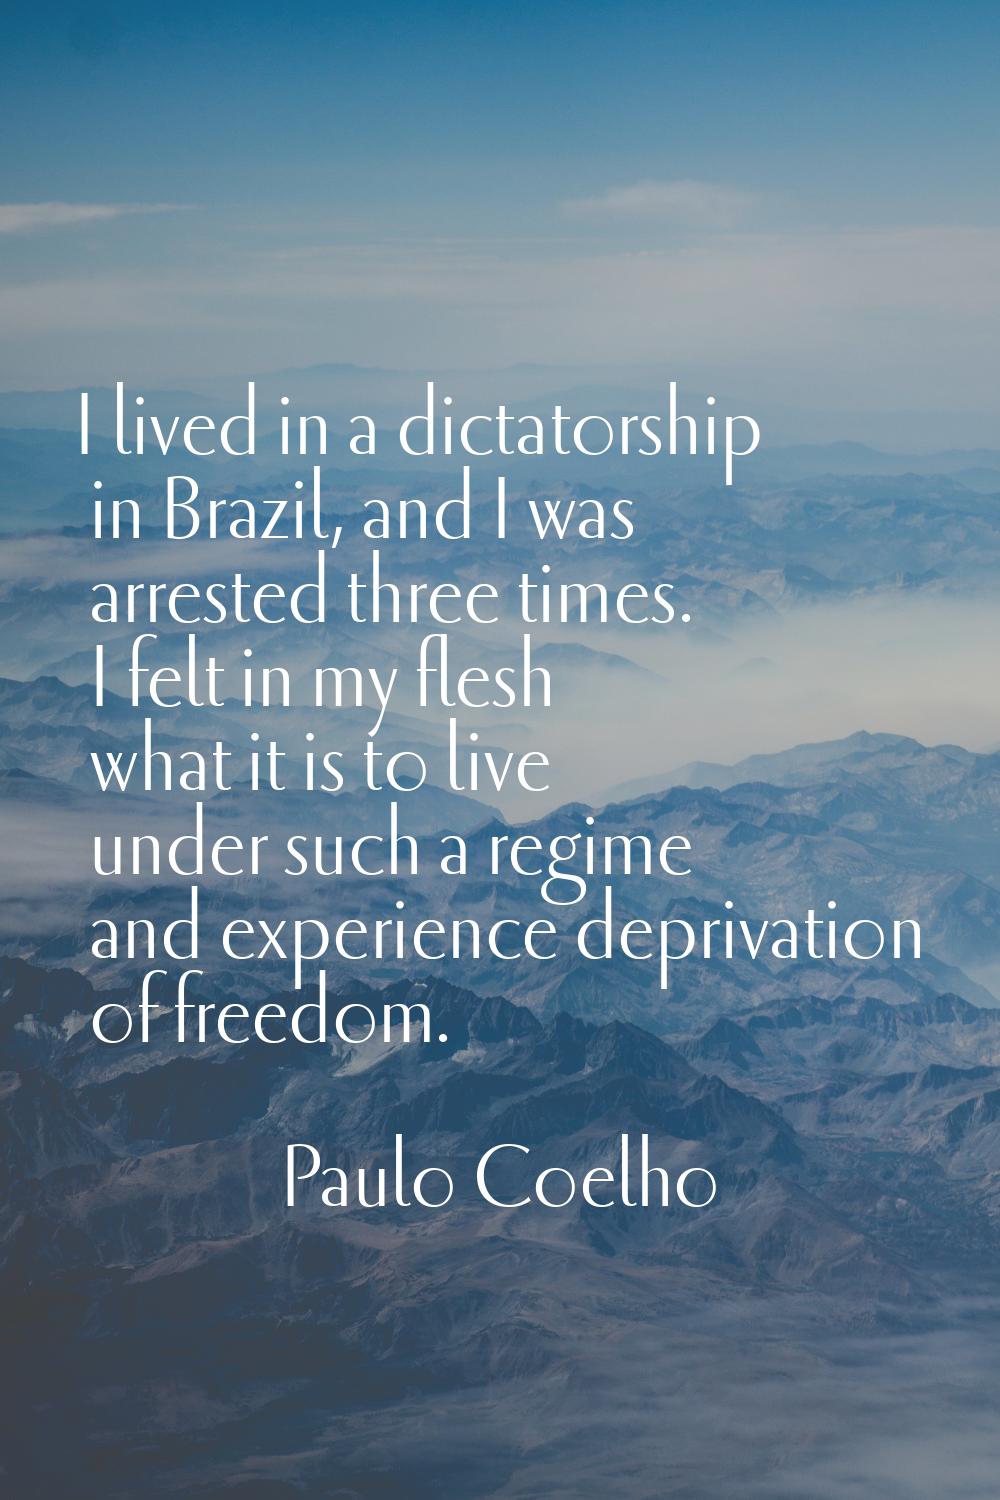 I lived in a dictatorship in Brazil, and I was arrested three times. I felt in my flesh what it is 